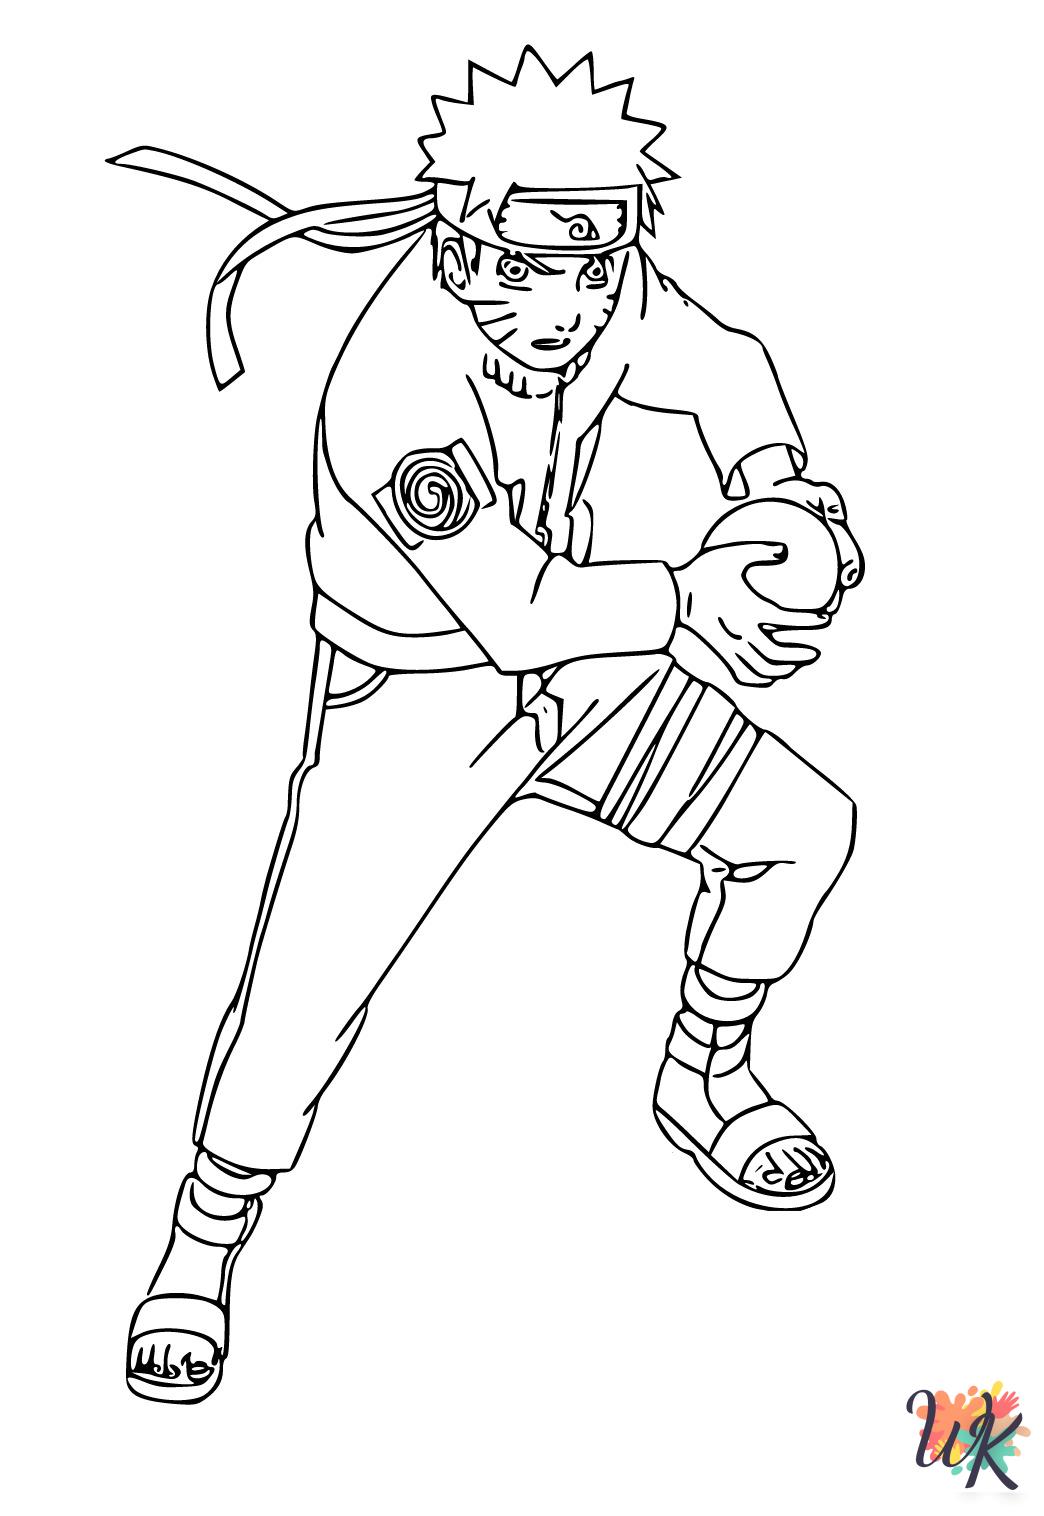 detailed Naruto coloring pages for adults